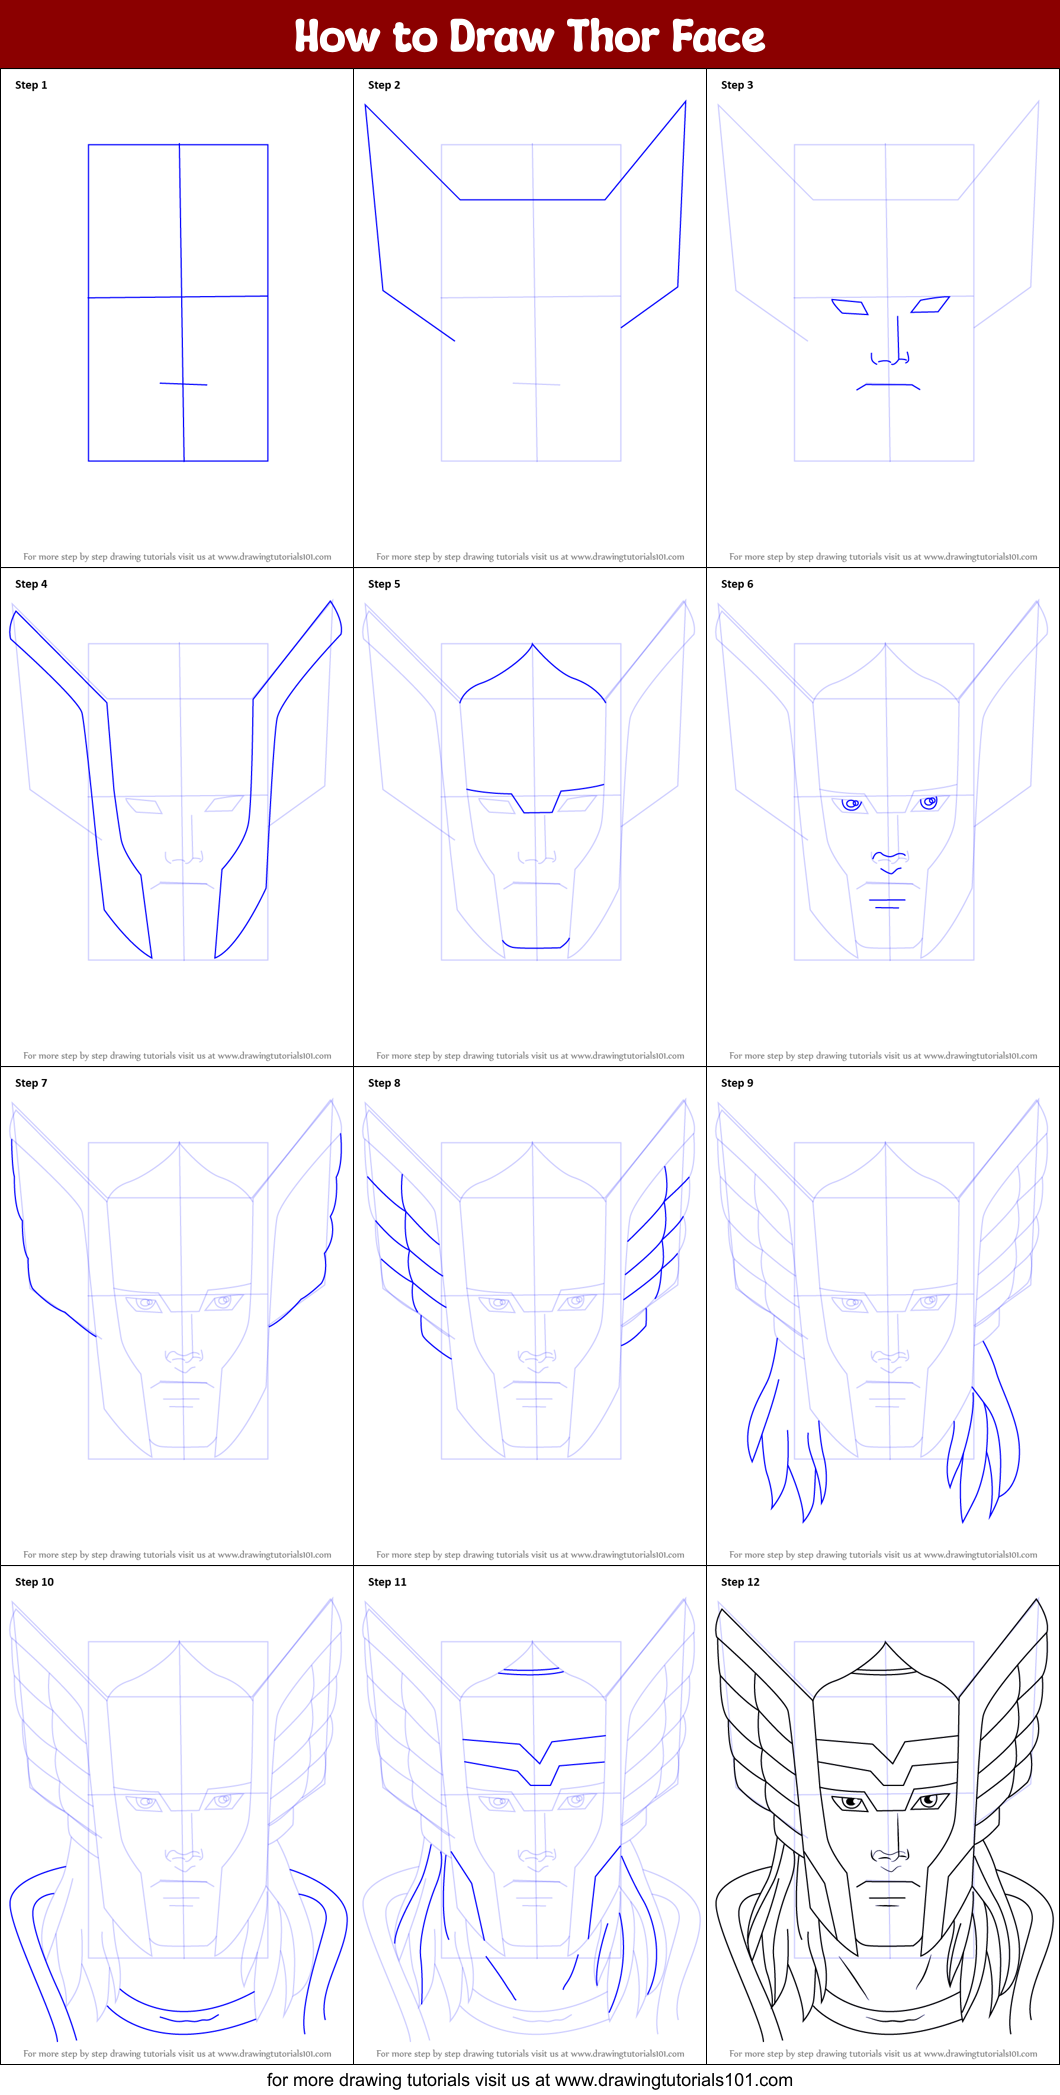 How to Draw Thor Face printable step by step drawing sheet